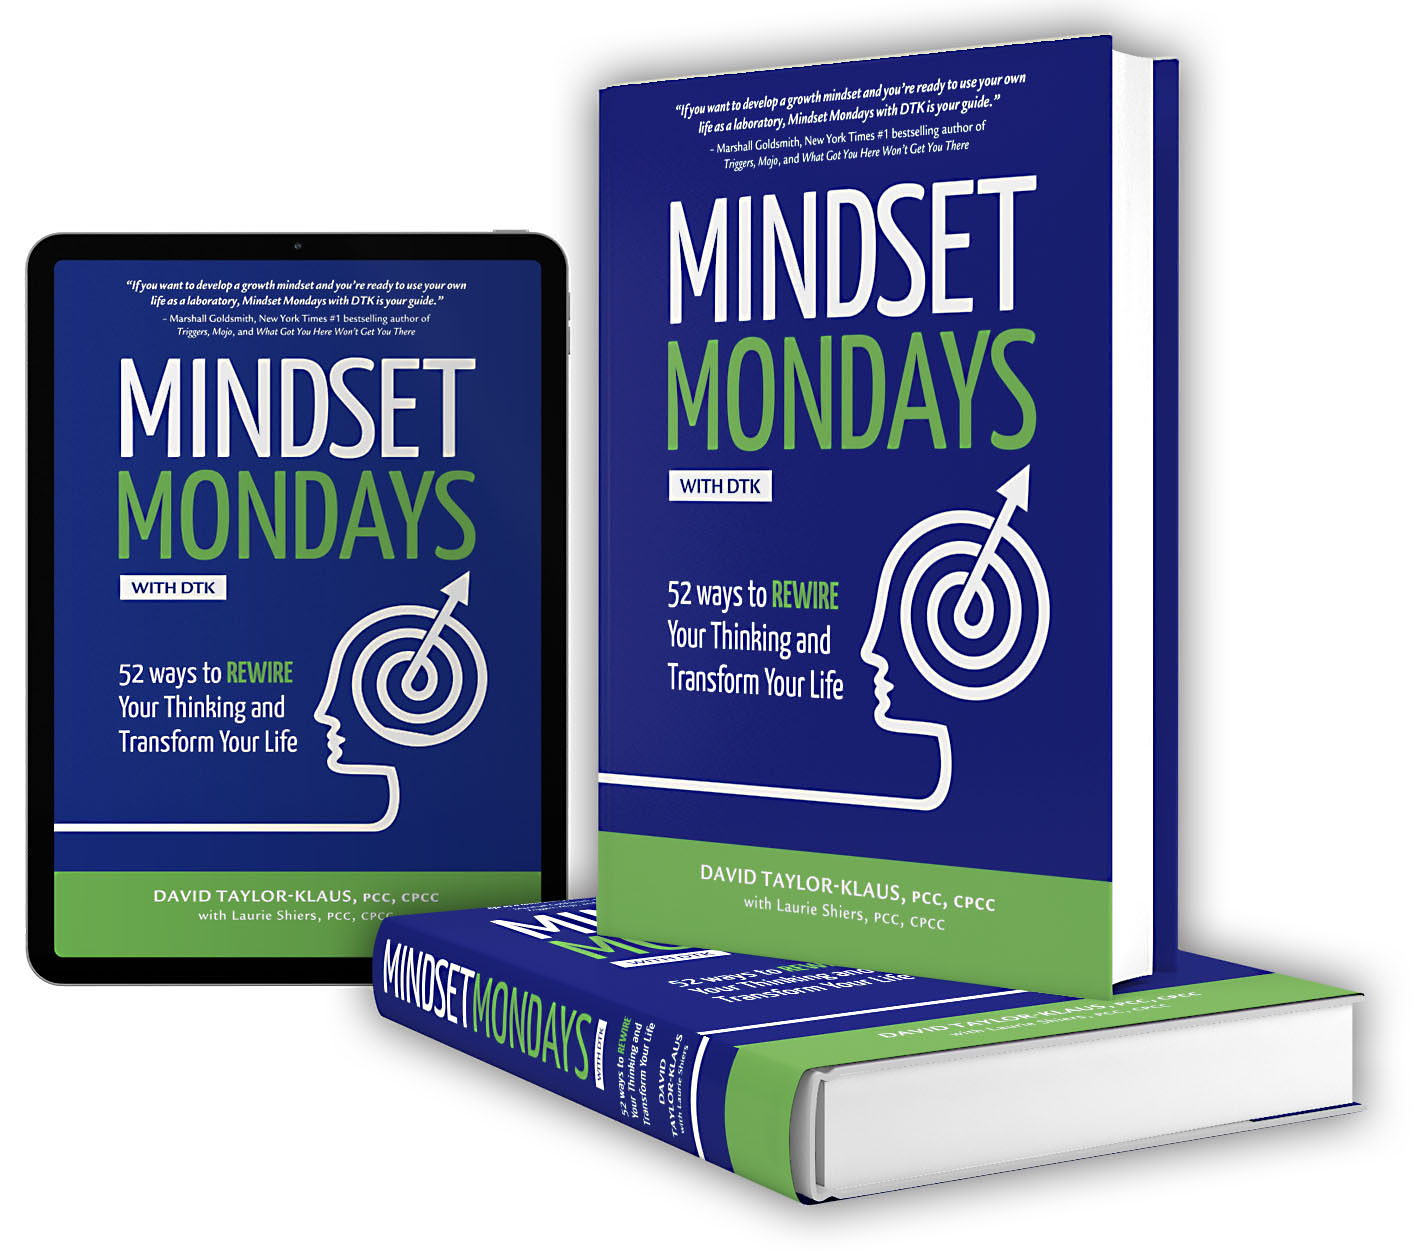 Mindset Mondays with DTK: 52 Ways to REWIRE Your Thinking and Transform Your Life